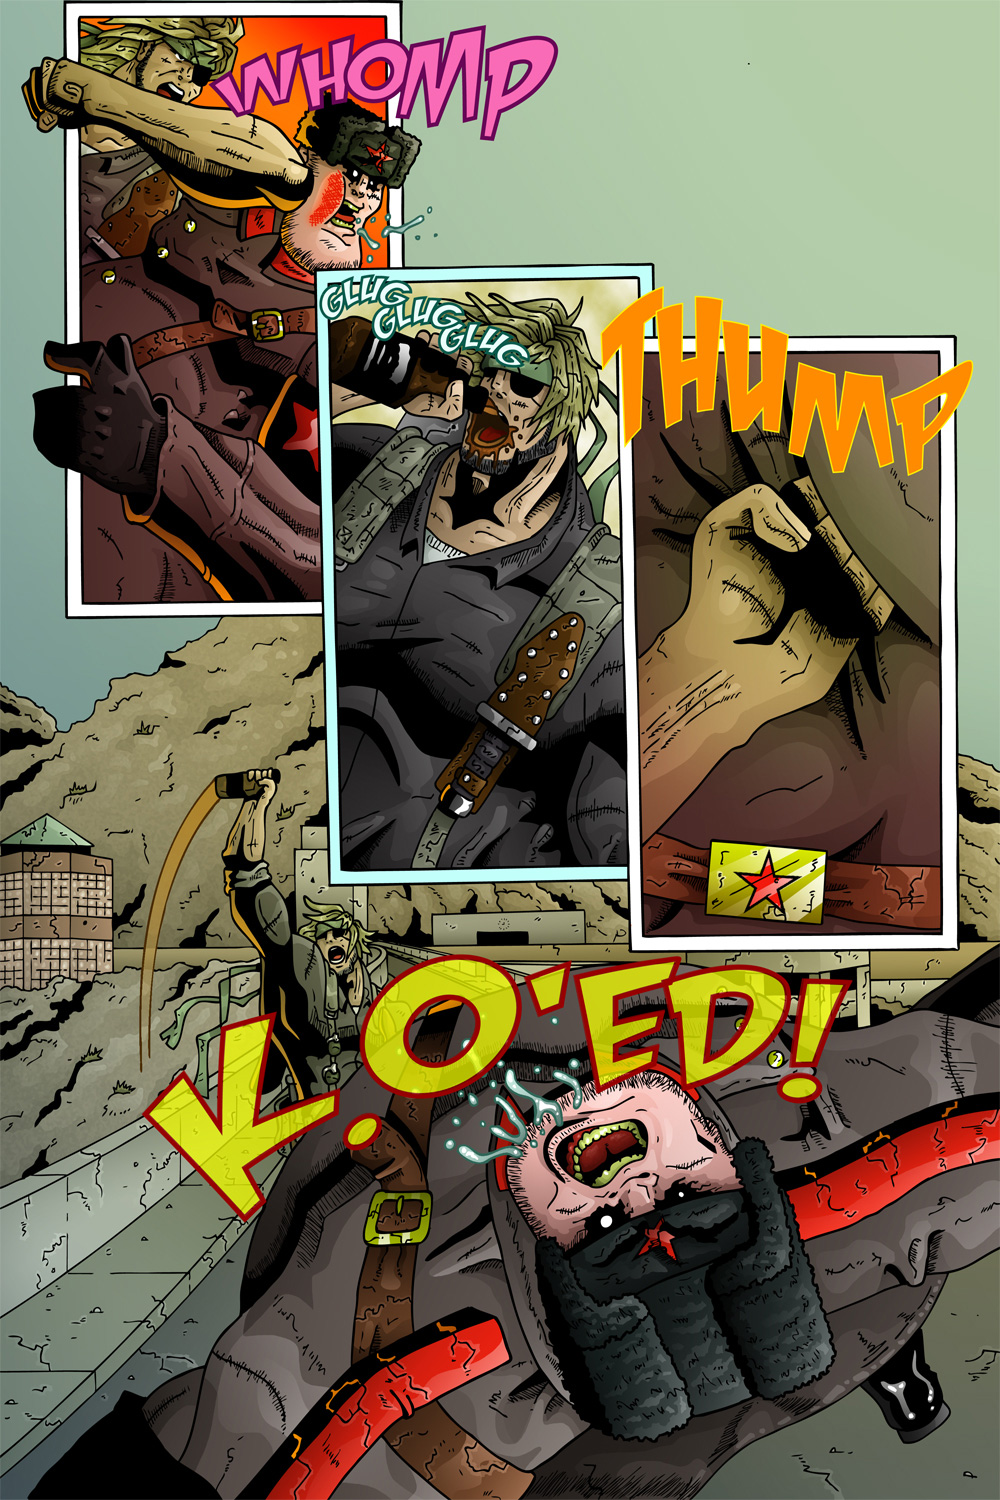 MISSION 005: PAGE 22 “THUMP”